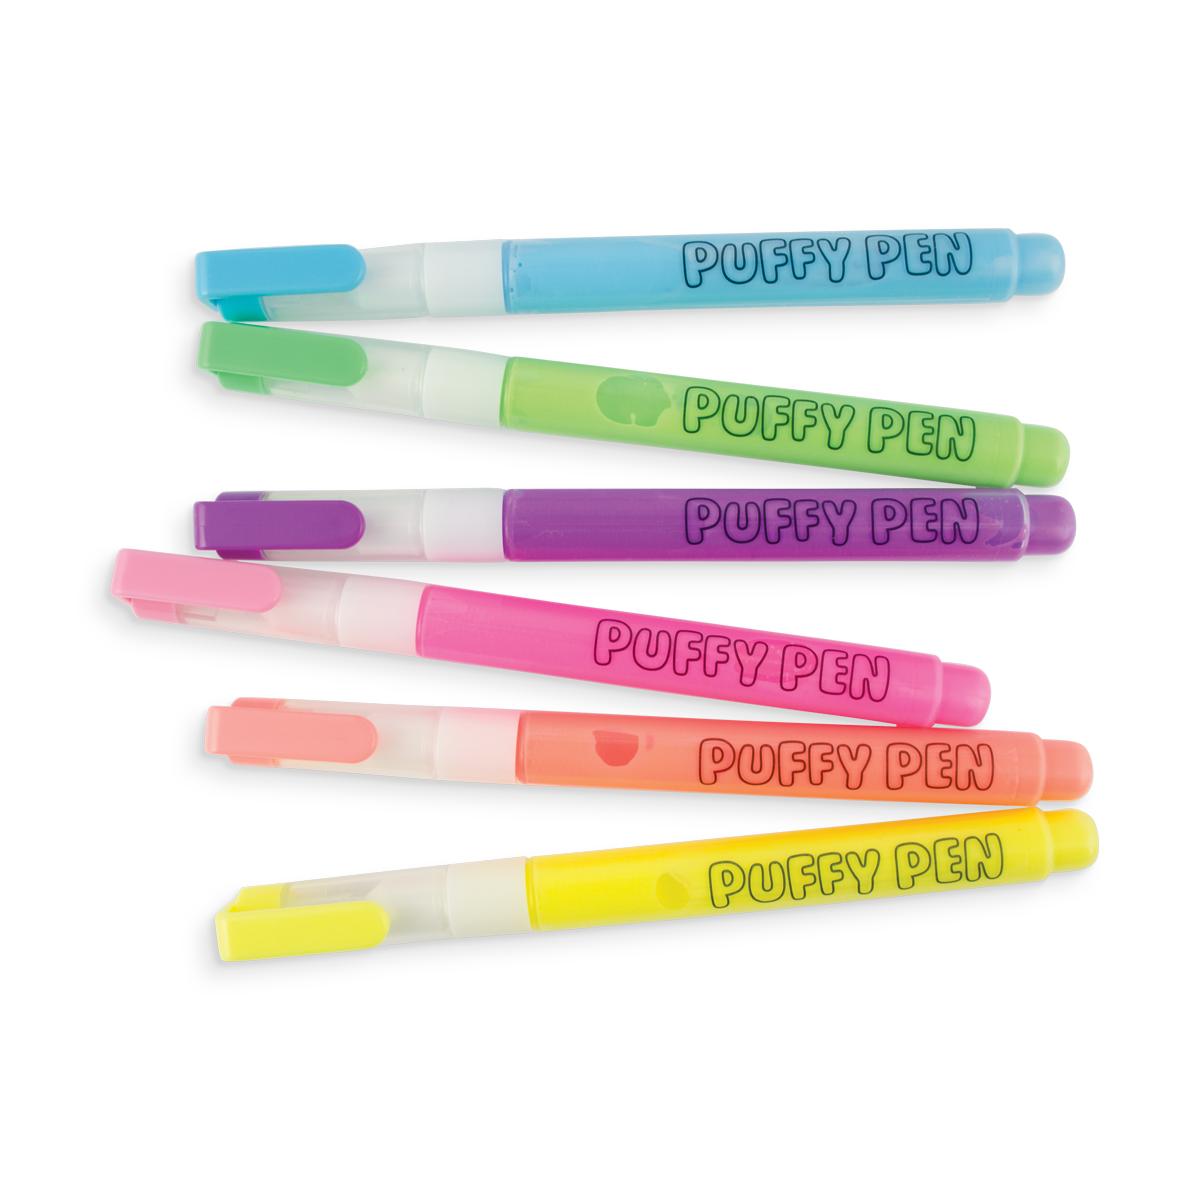 All 6 colors of Magic Puffy Pens